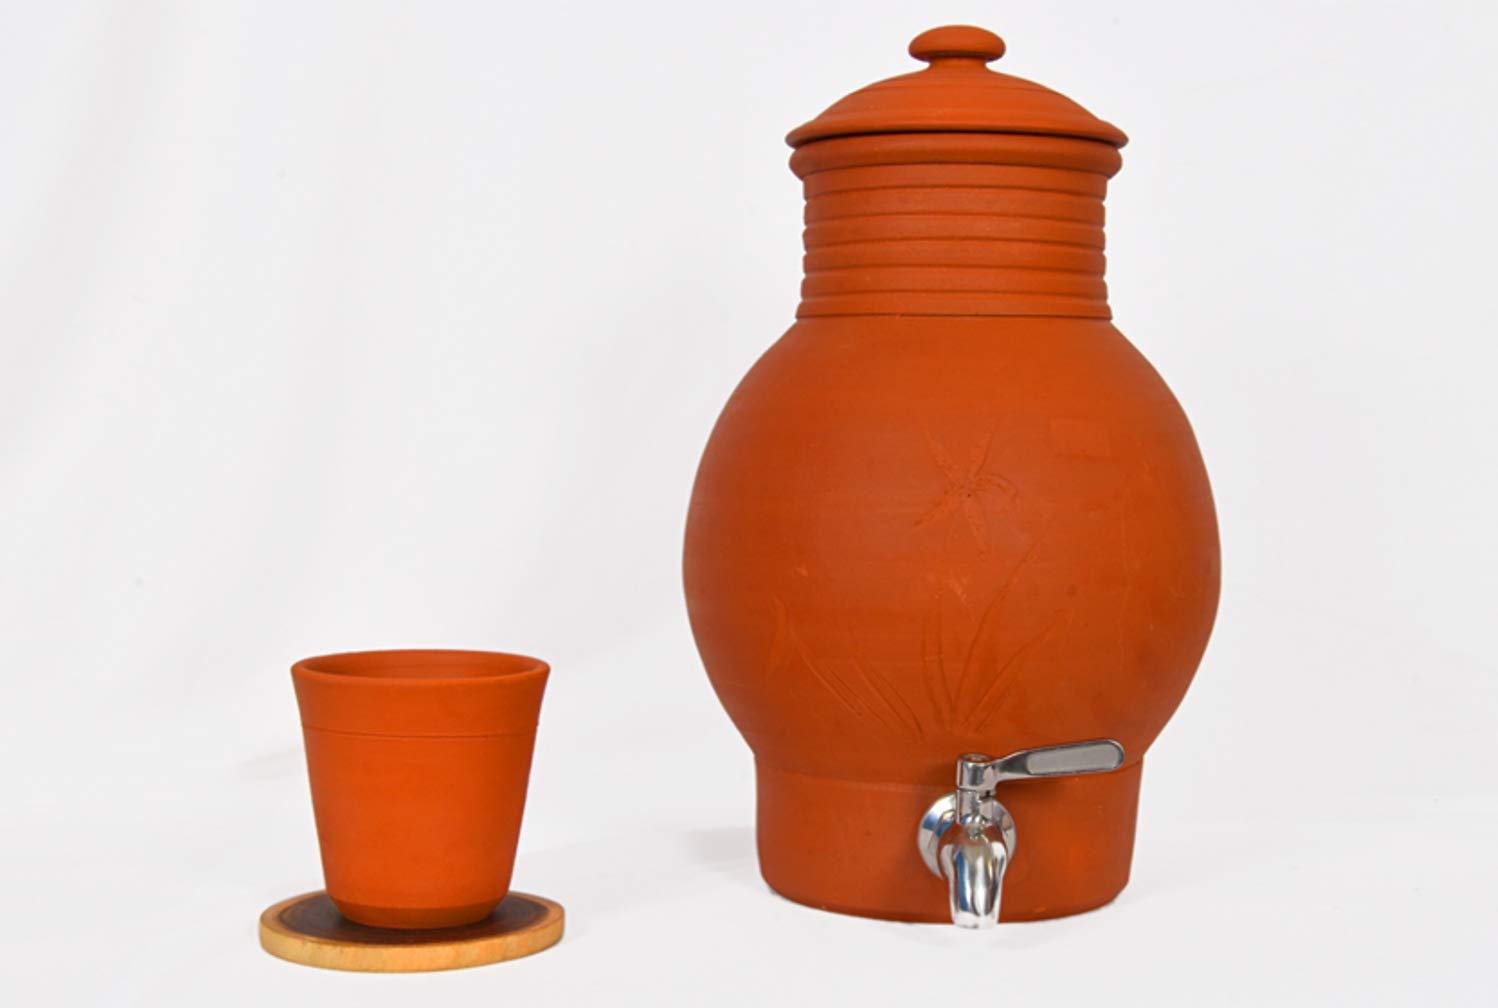 Clay Bottles to Pressure Cookers: 10 Terracotta Products For Your Home